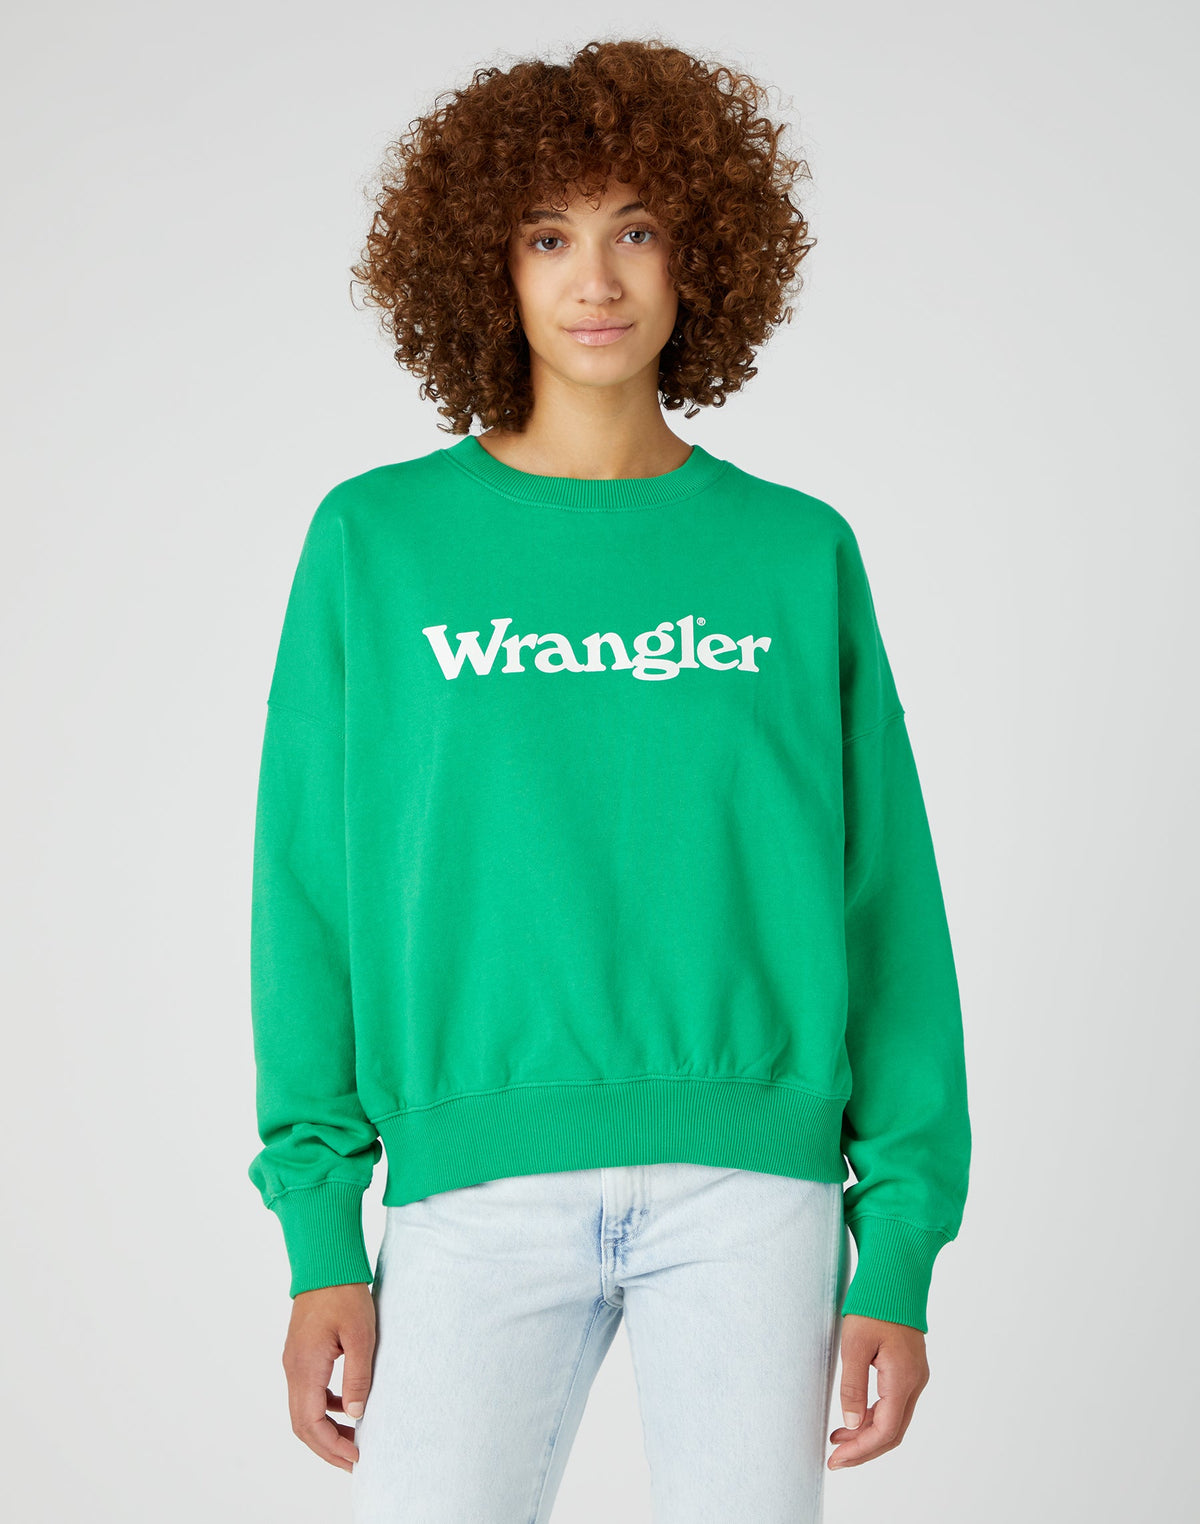 Relaxed Sweatshirt in Bright Green